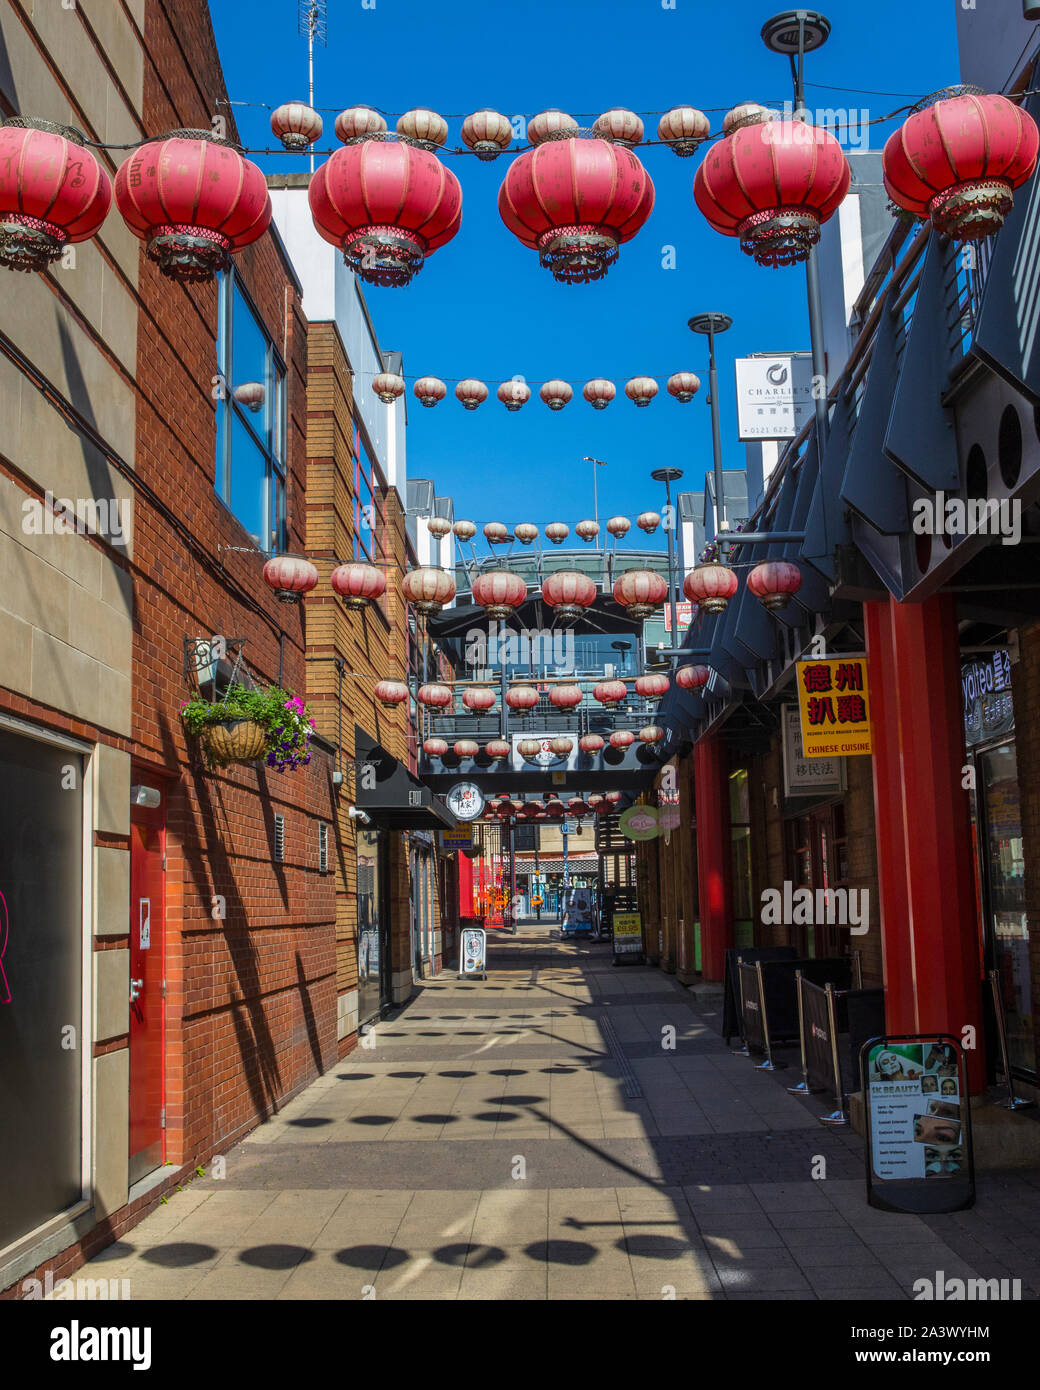 Birmingham, UK - September 20th 2019: Looking down Cathay Street in the city of Birmingham, UK. Cathay Street is located within the Chinese Quarter in Stock Photo